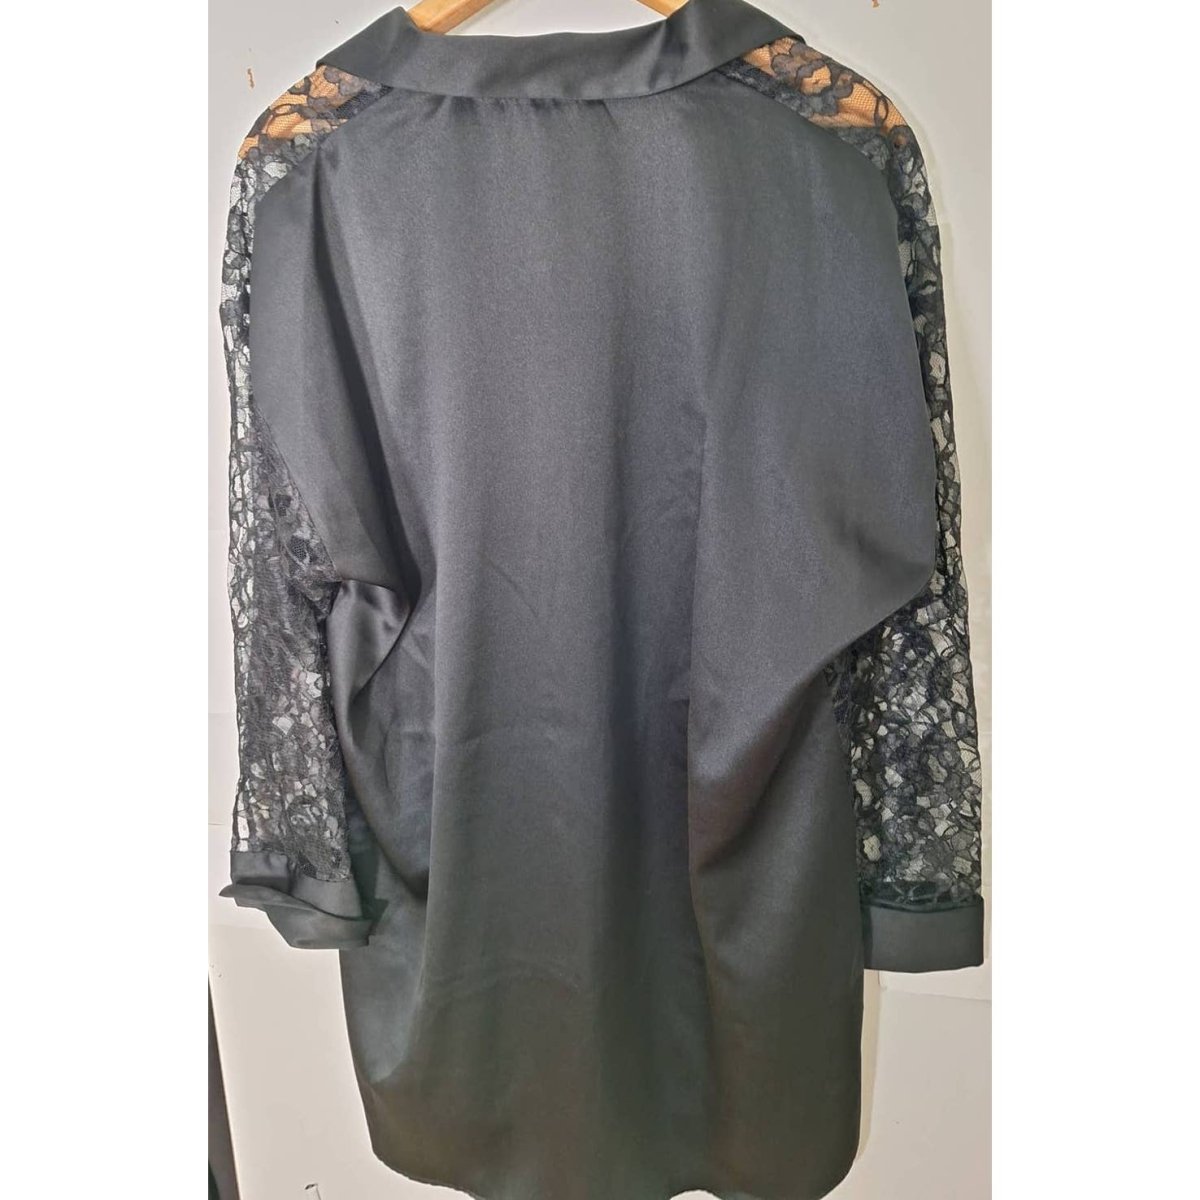 80s/90s Black Sheer Lace Oversized Button Up Lingerie Shirt Size Small Chest up to 50" - themallvintage The Mall Vintage